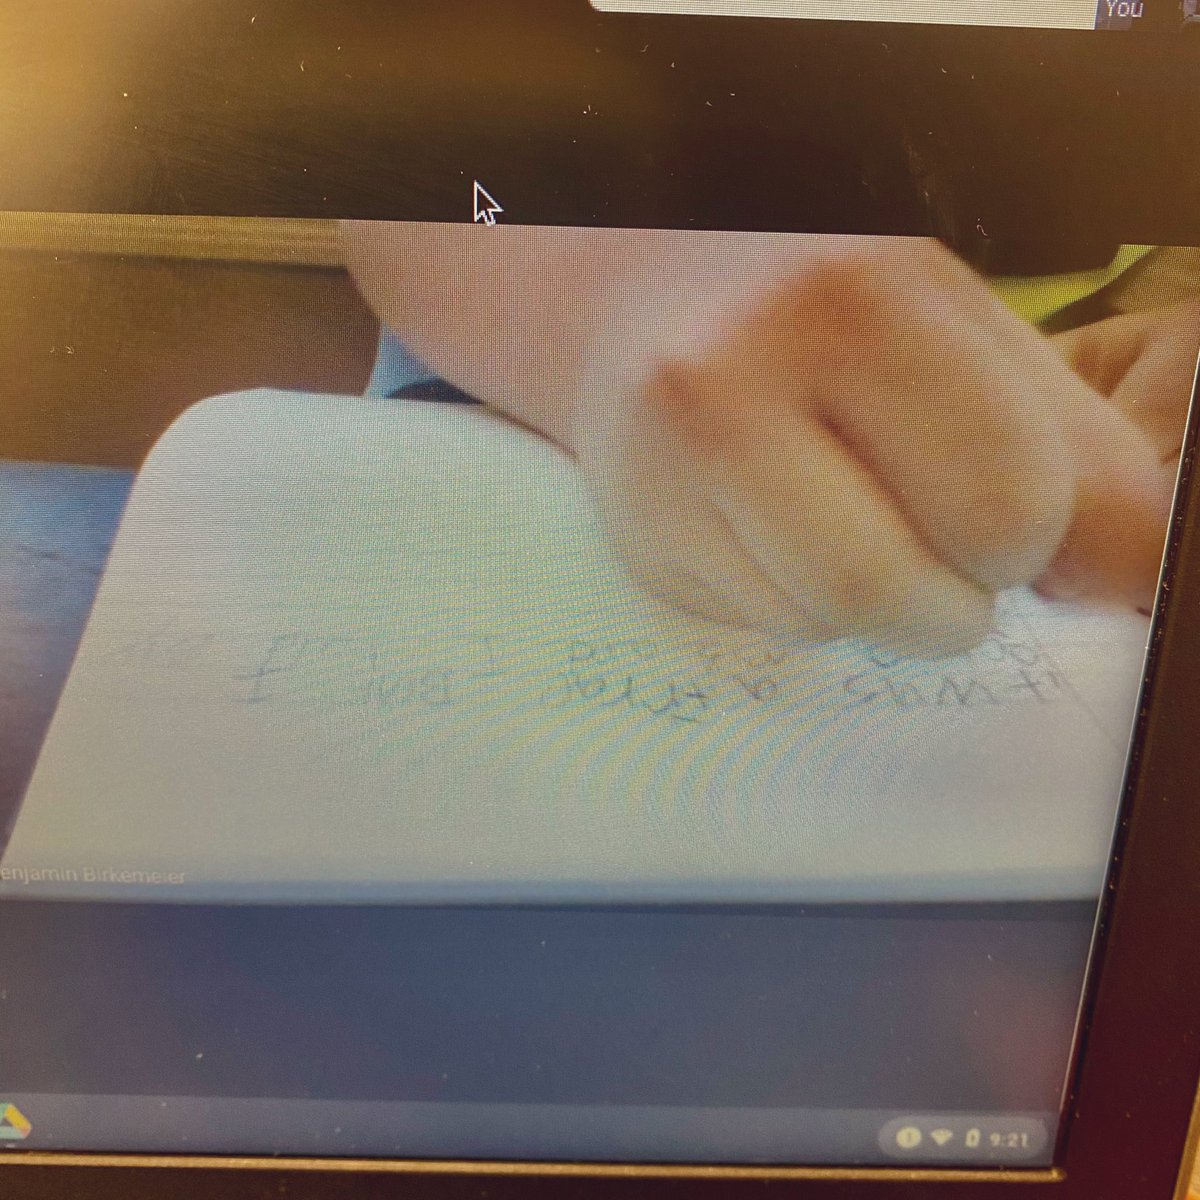 Watching student writing in real time! It can be done! ✍️ #virtuallearning #guidedwriting